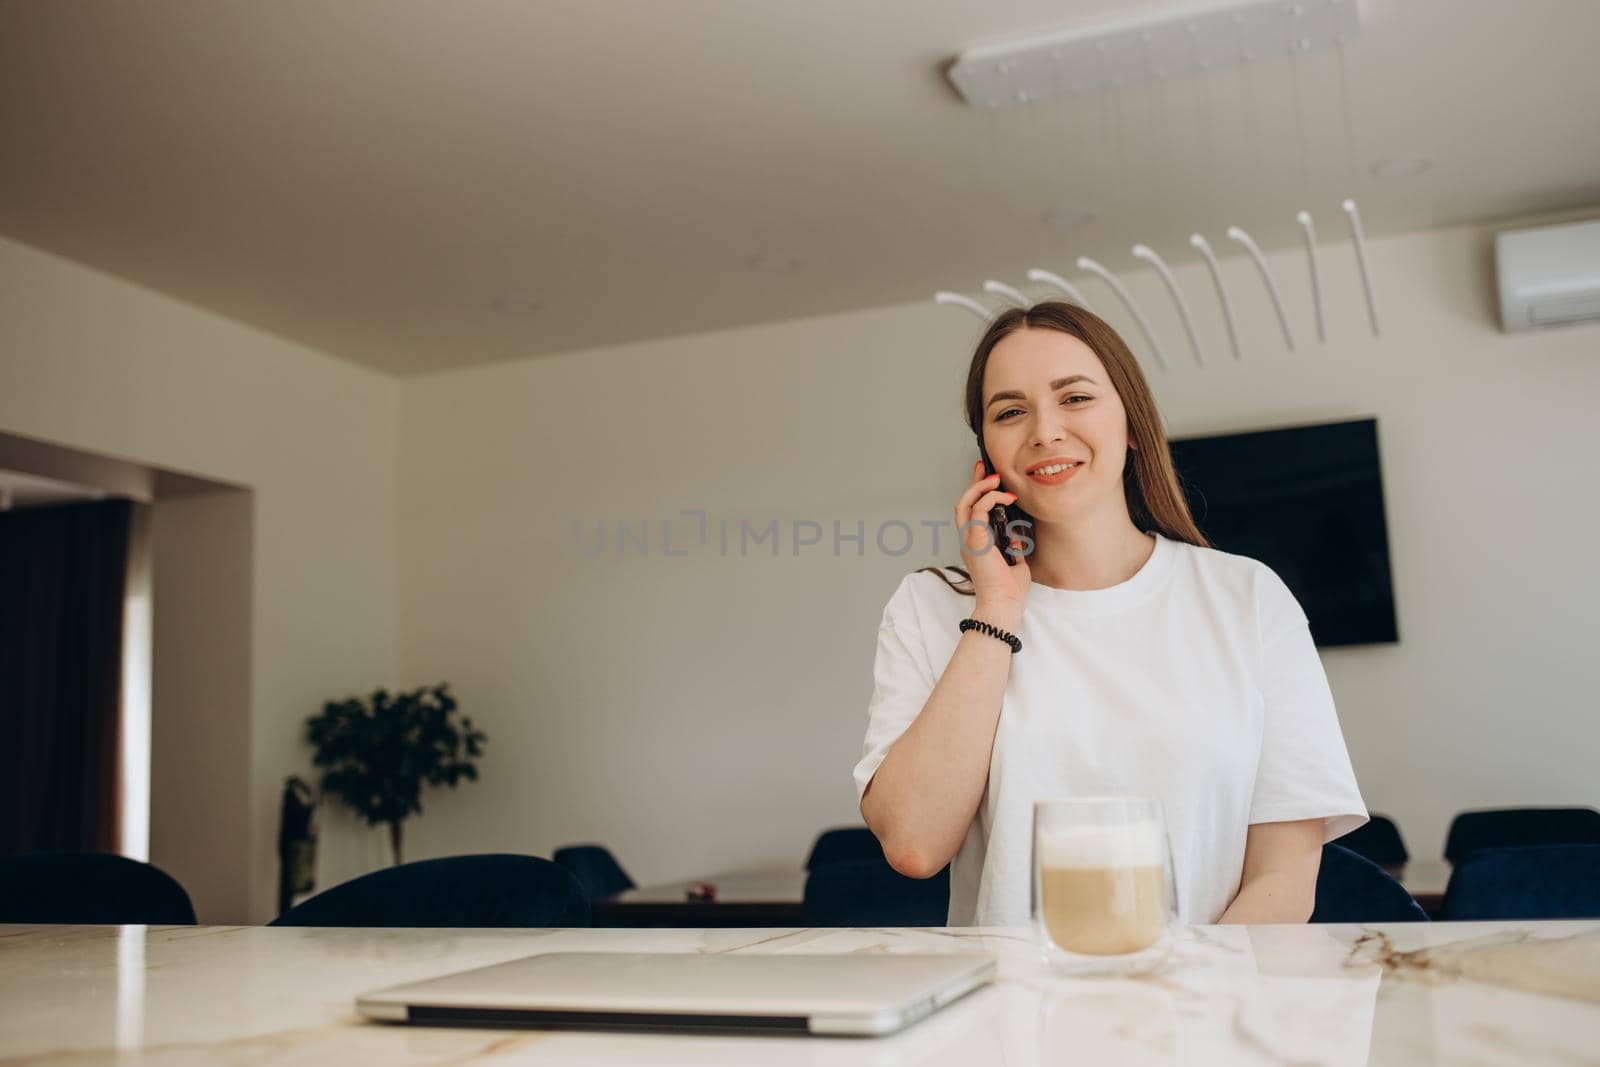 Young attractive smiling Latina woman talking on phone while cooking alone in kitchen. Housewife holds cellphone chatting distracted from healthy vegetarian food preparation. Chores, lifestyle concept by fentonroma